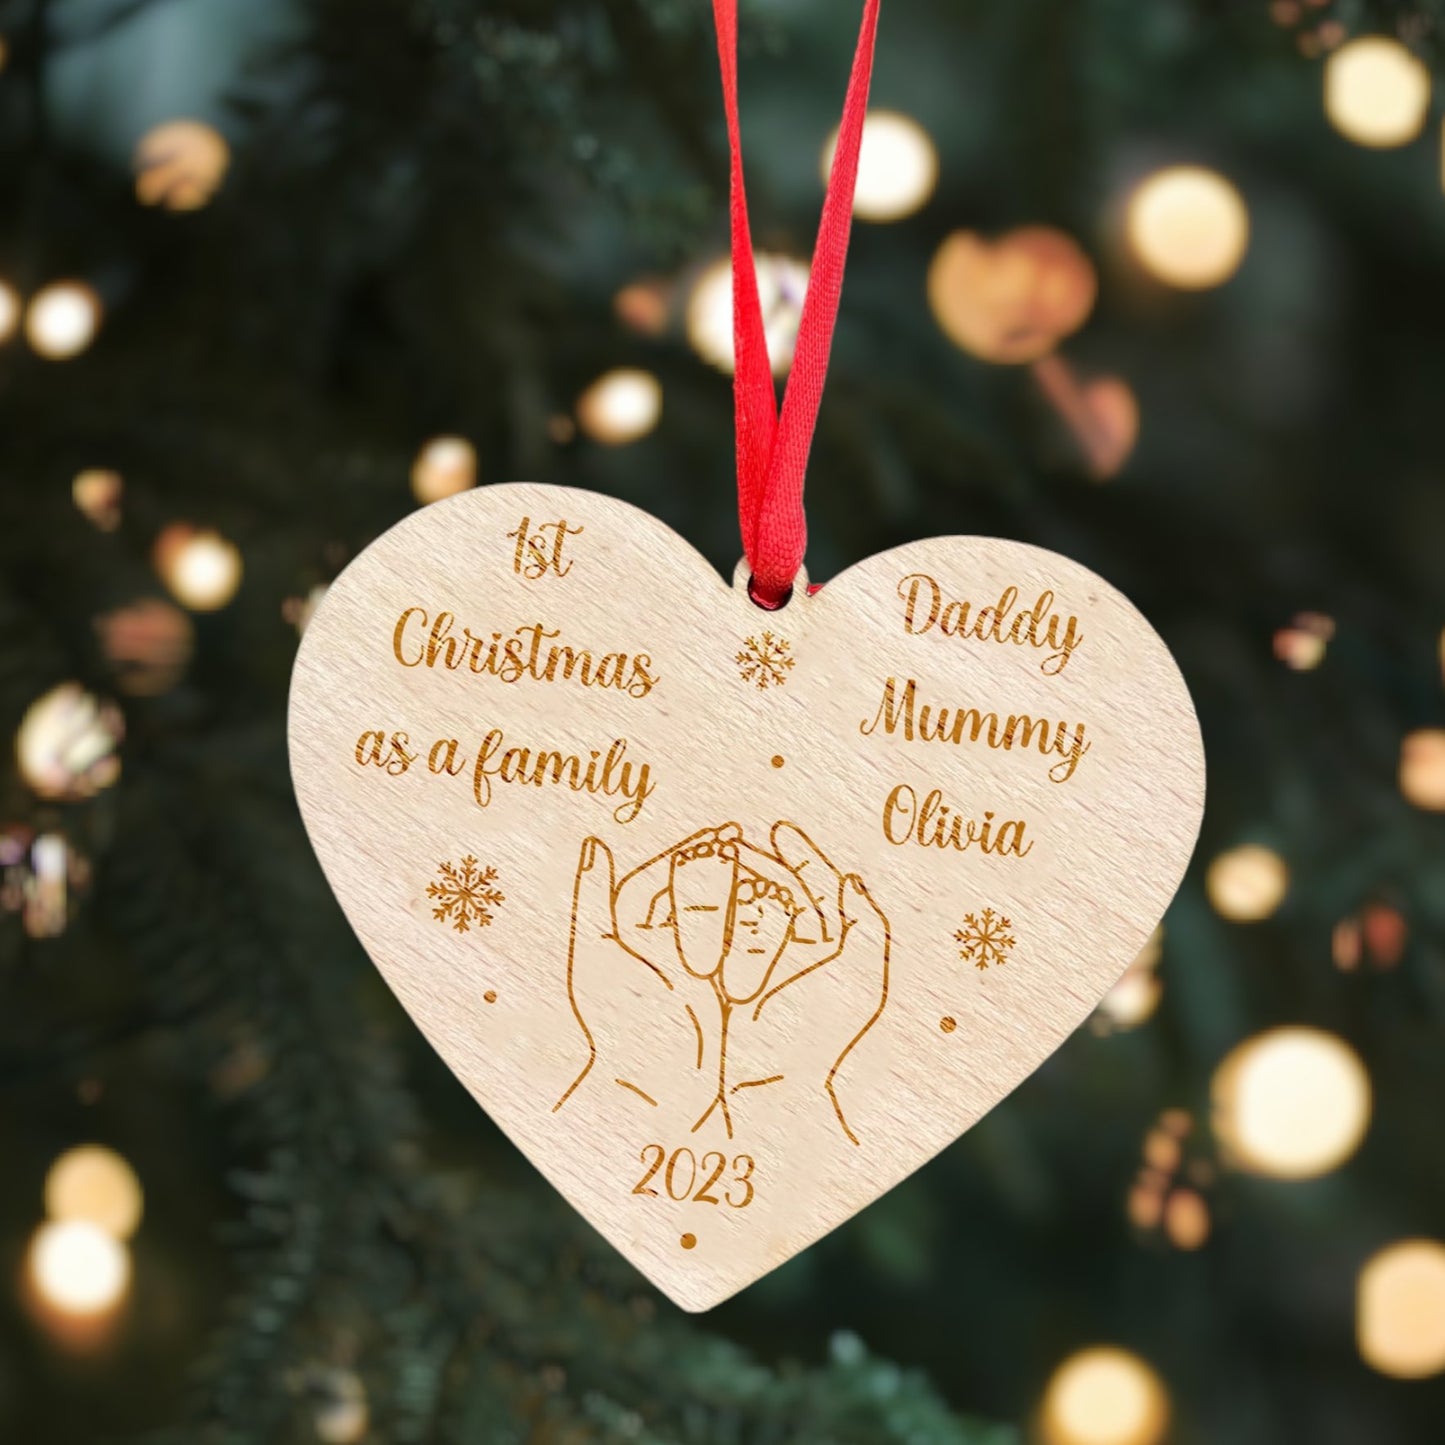 Personalised Wooden Heart Shaped Christmas Bauble: Family Christmas